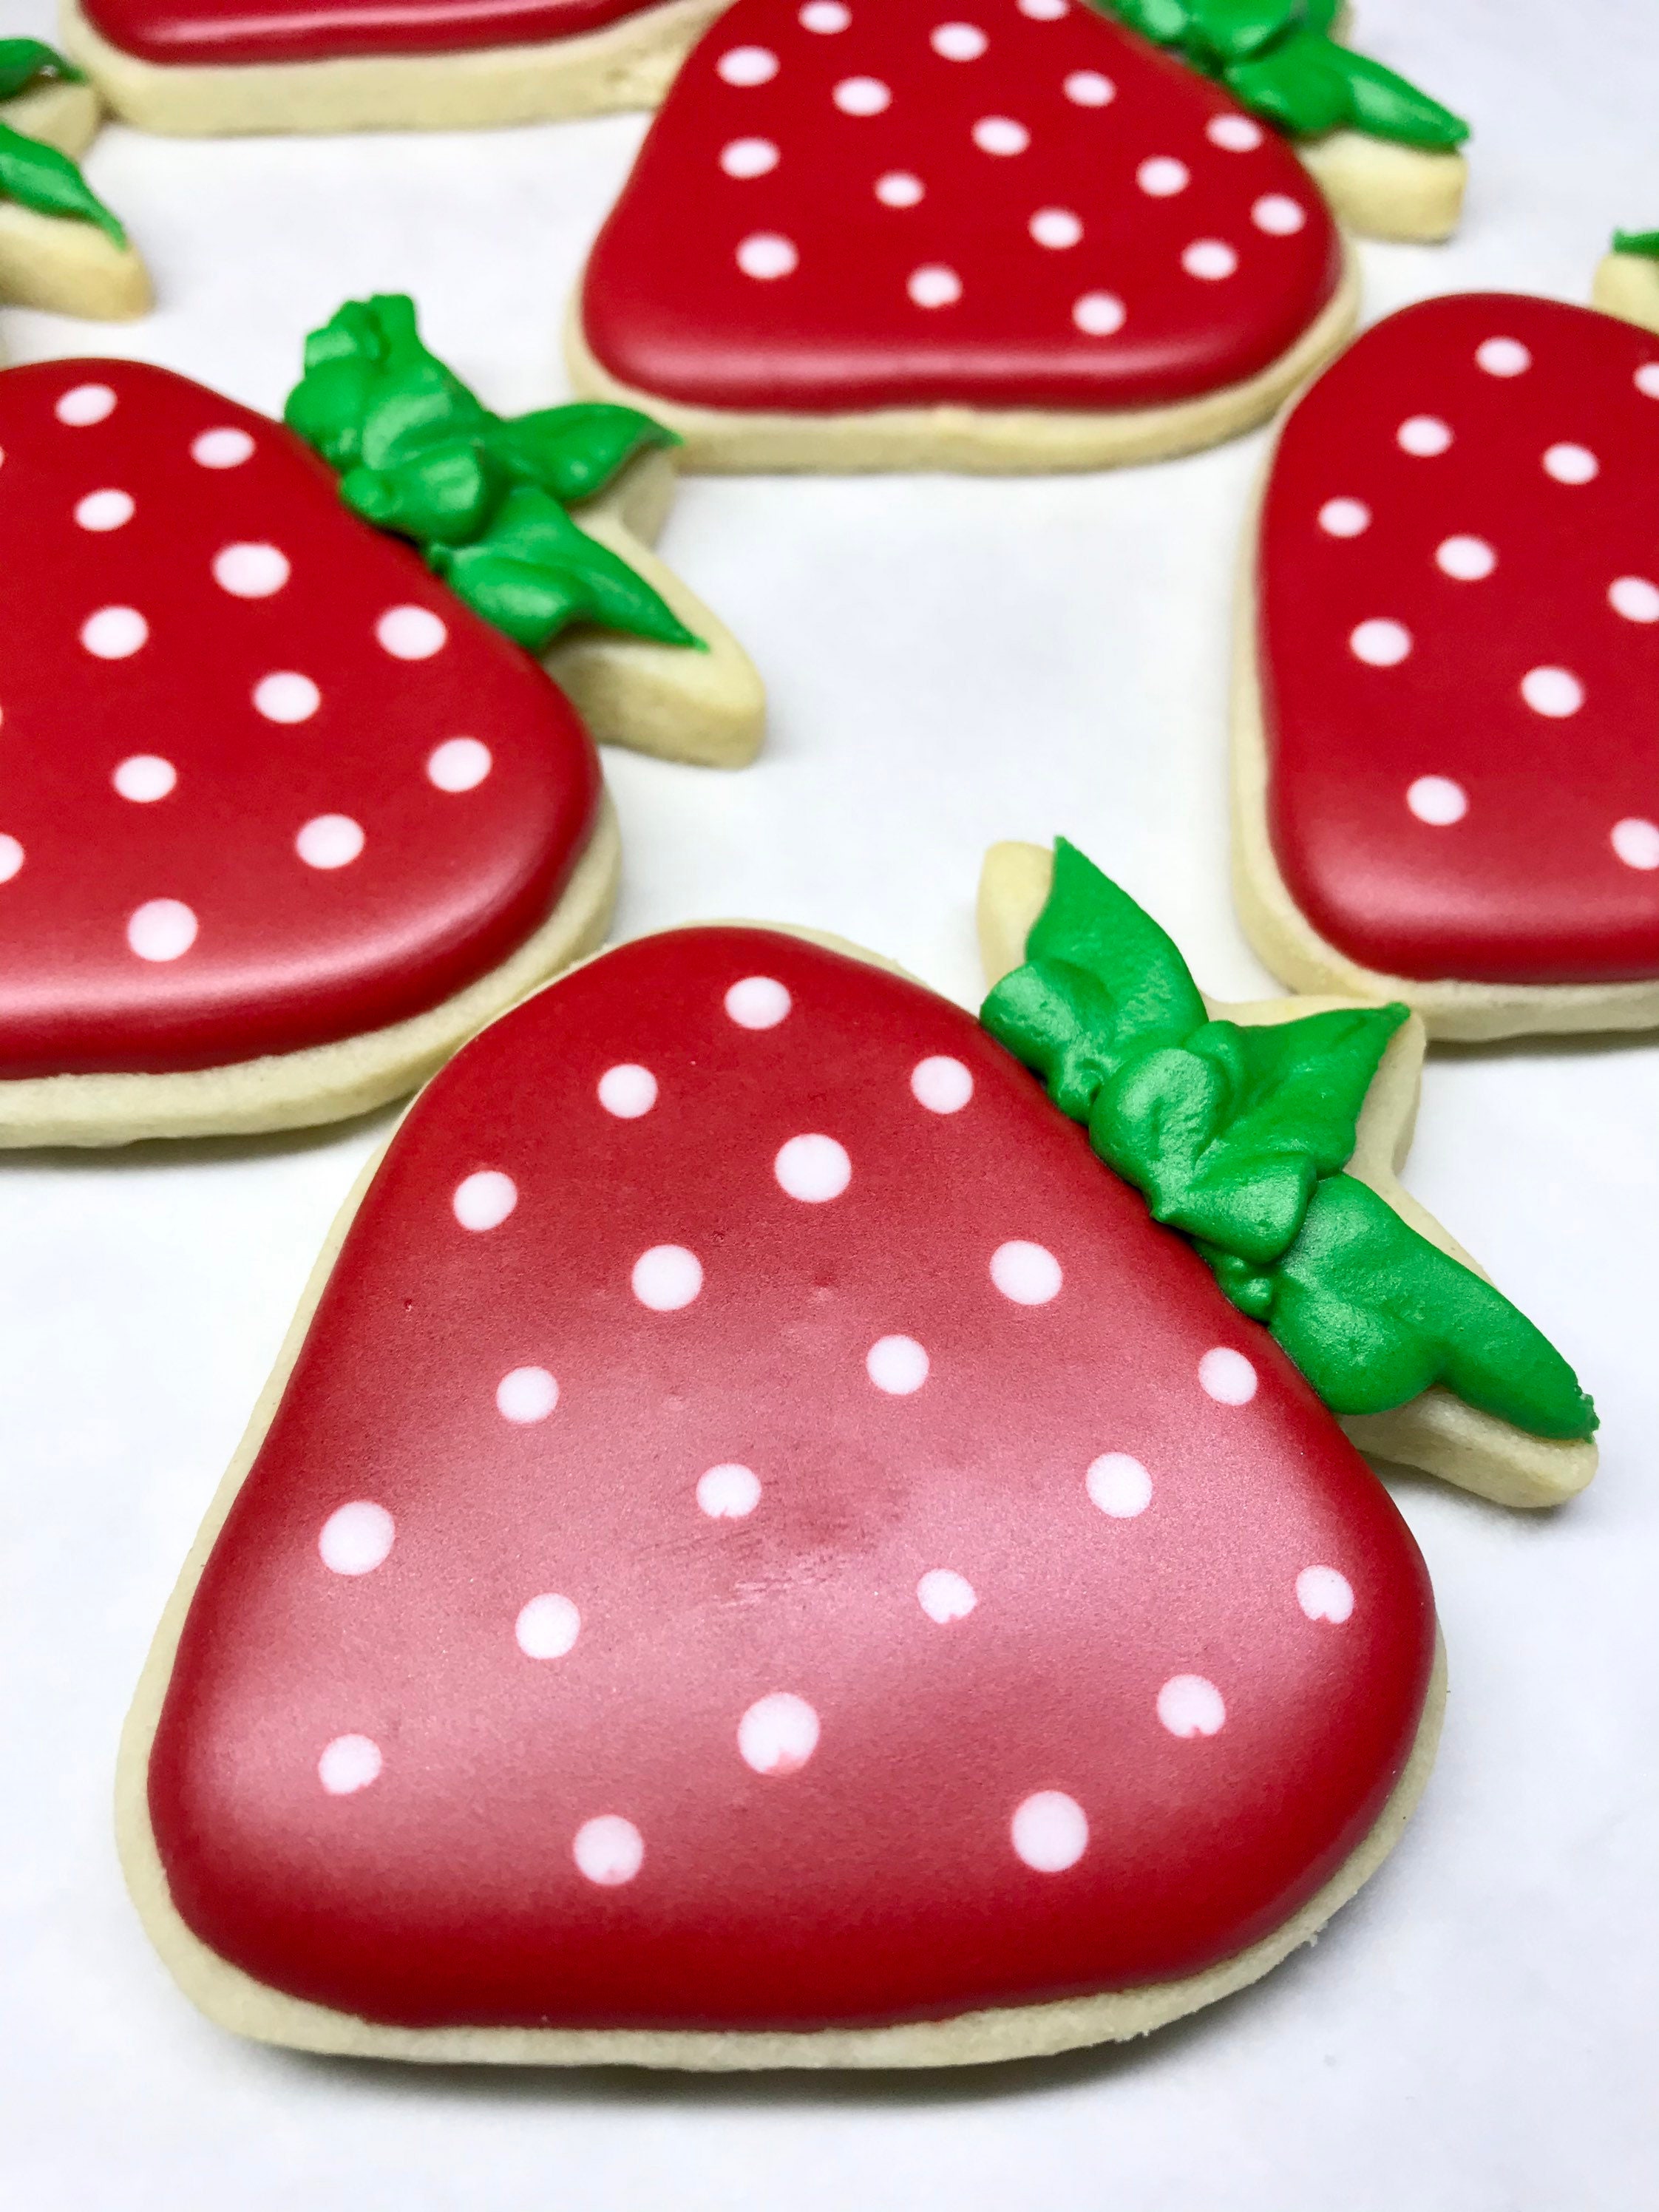 maybe strawberry: Gromit sugar cookies